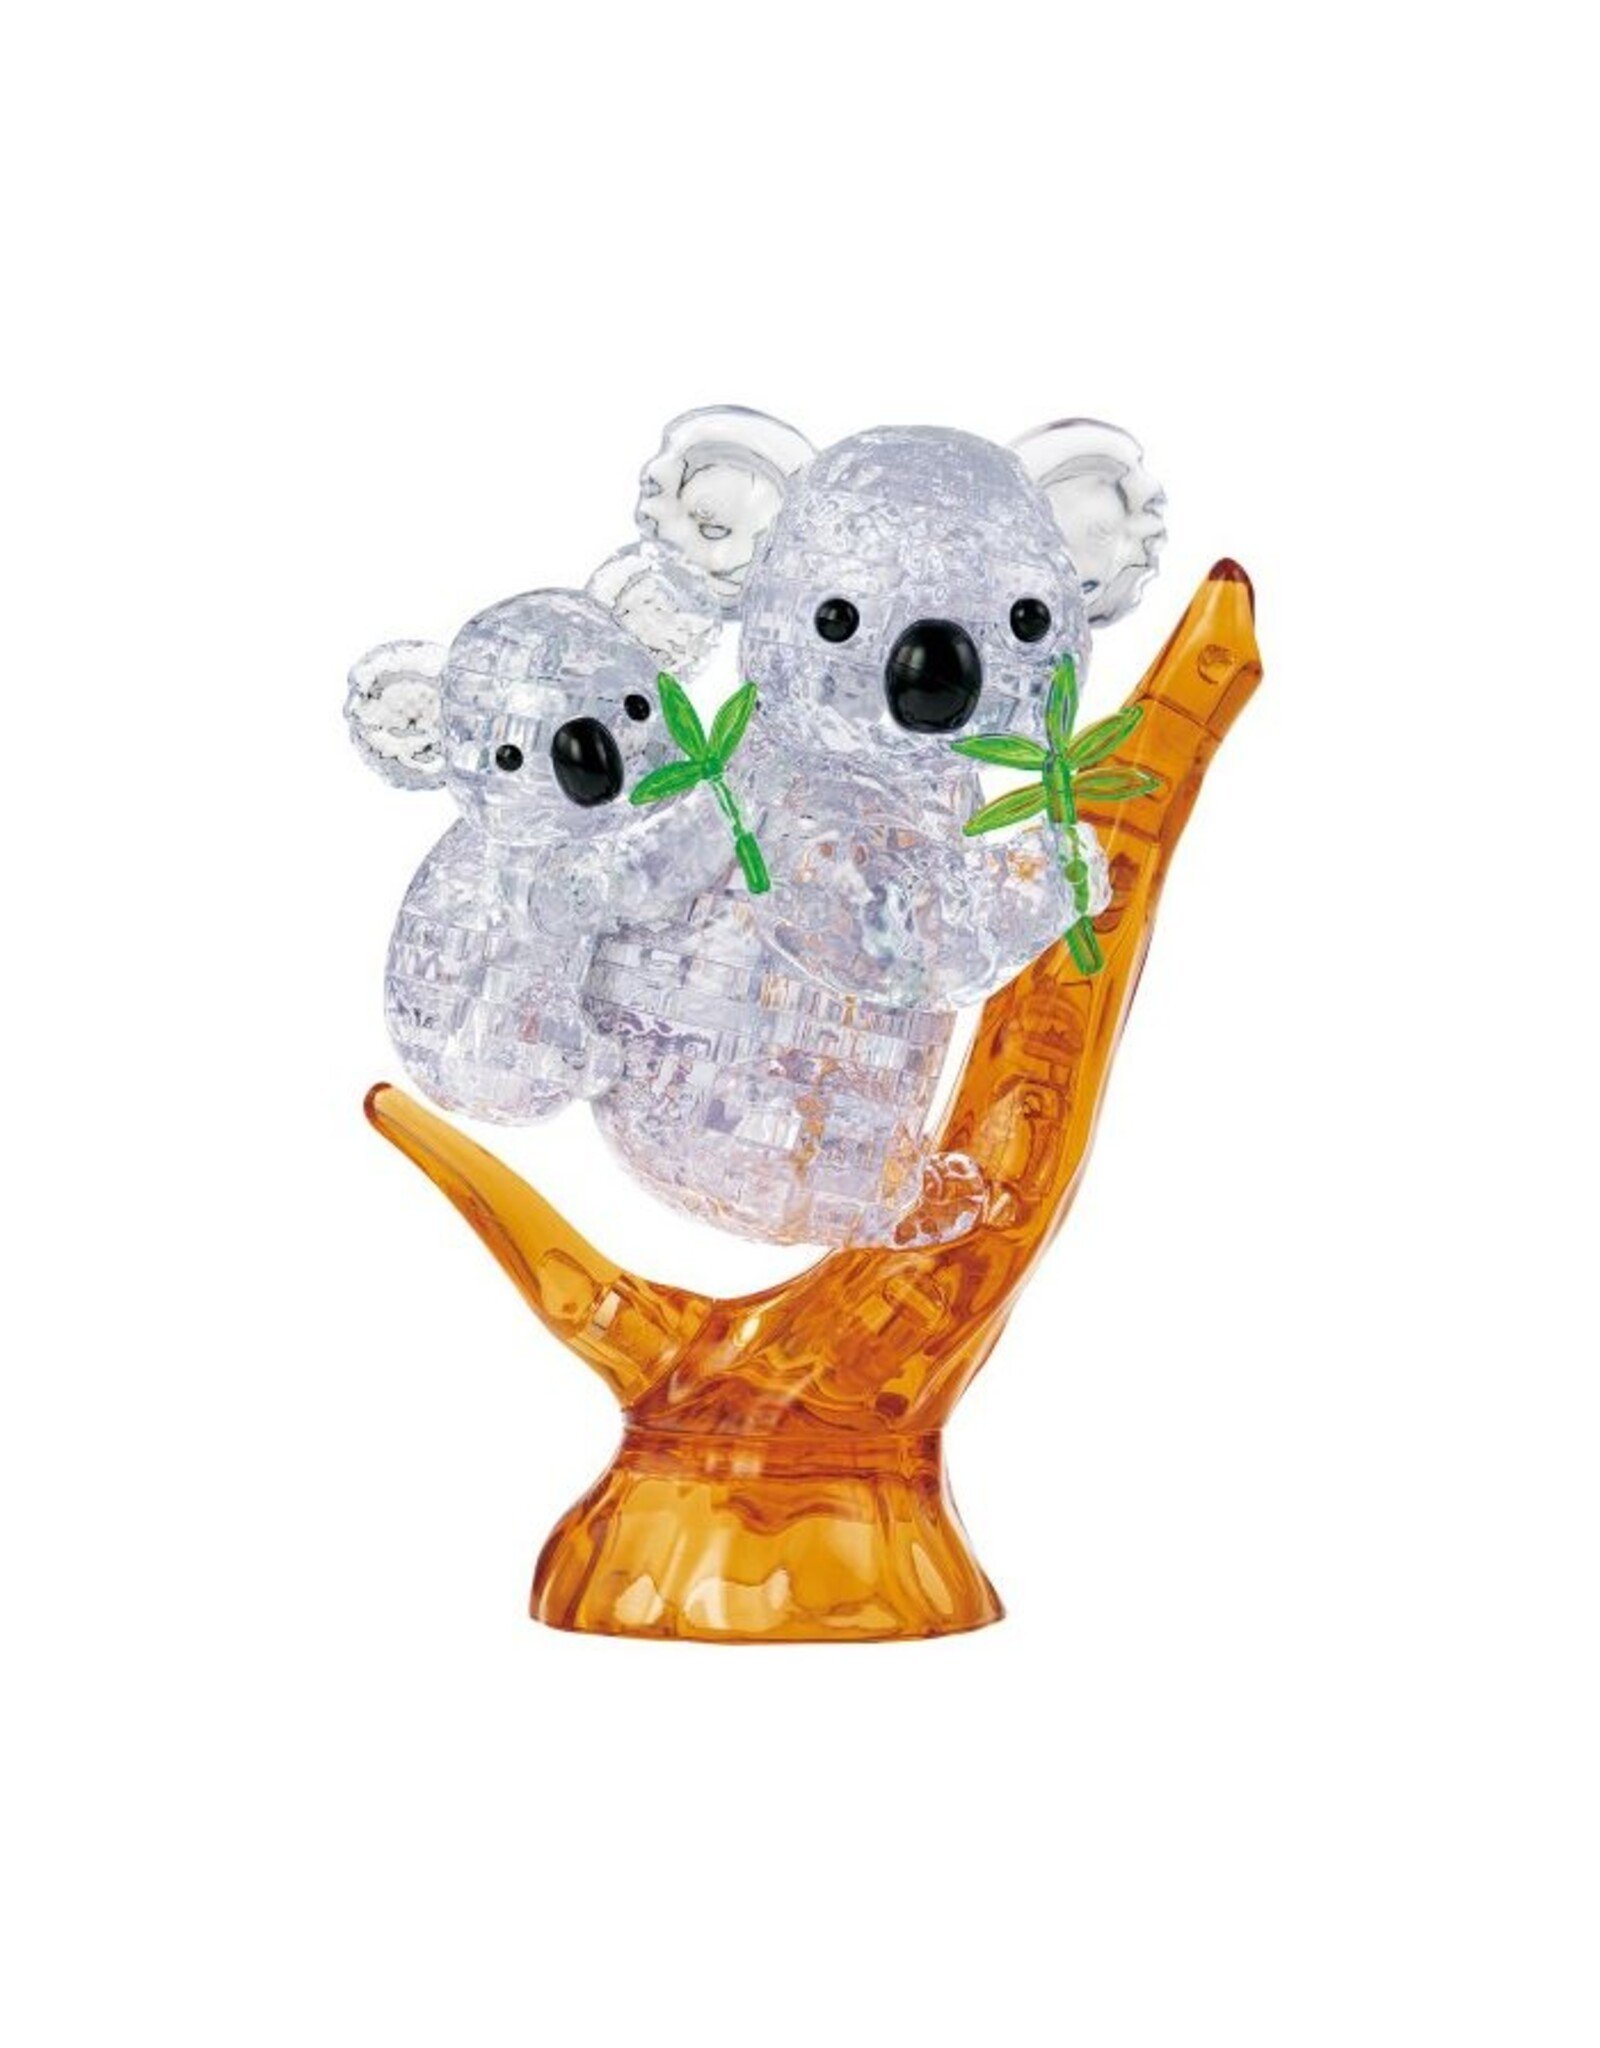 University Games Puzzle: 3D Crystal: Koala and Baby